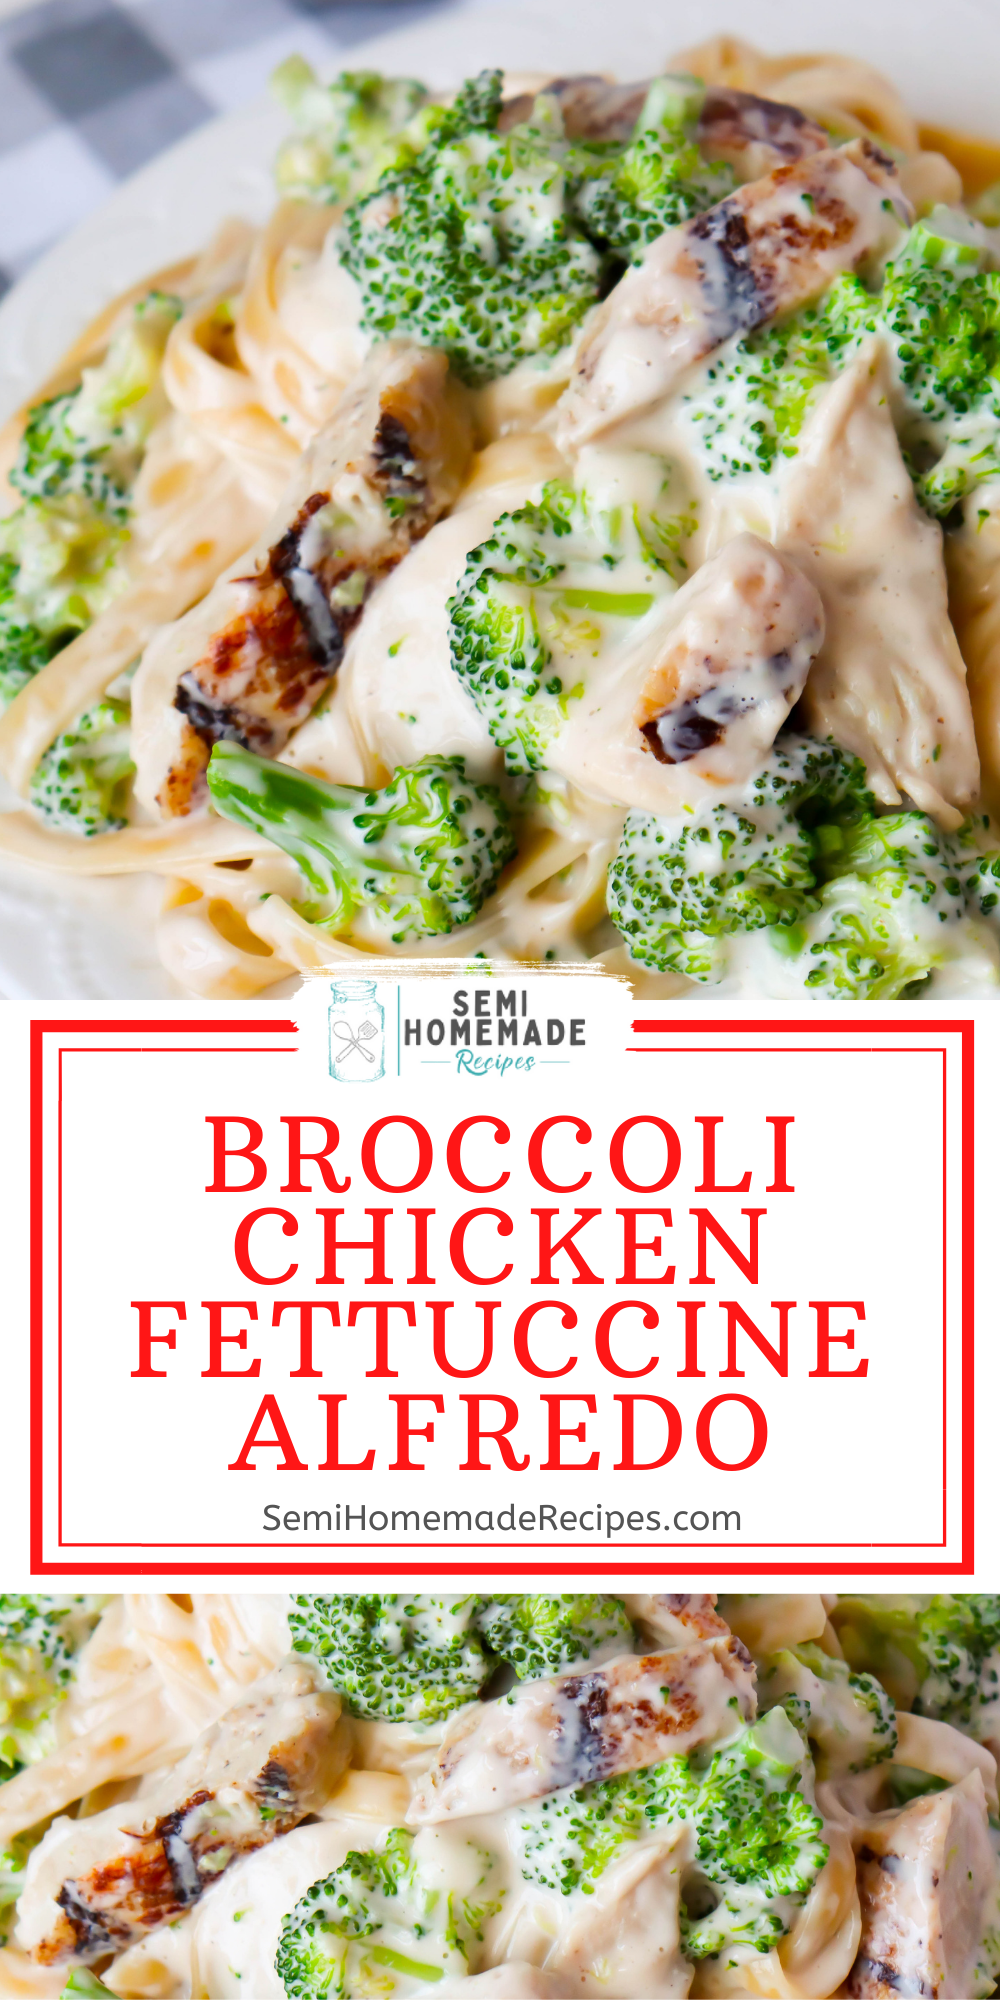 Ready for a great semi homemade dinner idea? This super easy Broccoli Chicken Fettuccine Alfredo recipe uses your favorite jarred alfredo sauce, frozen broccoli florets, chicken and fettuccini pasta to create a super tasty and fast meal! 